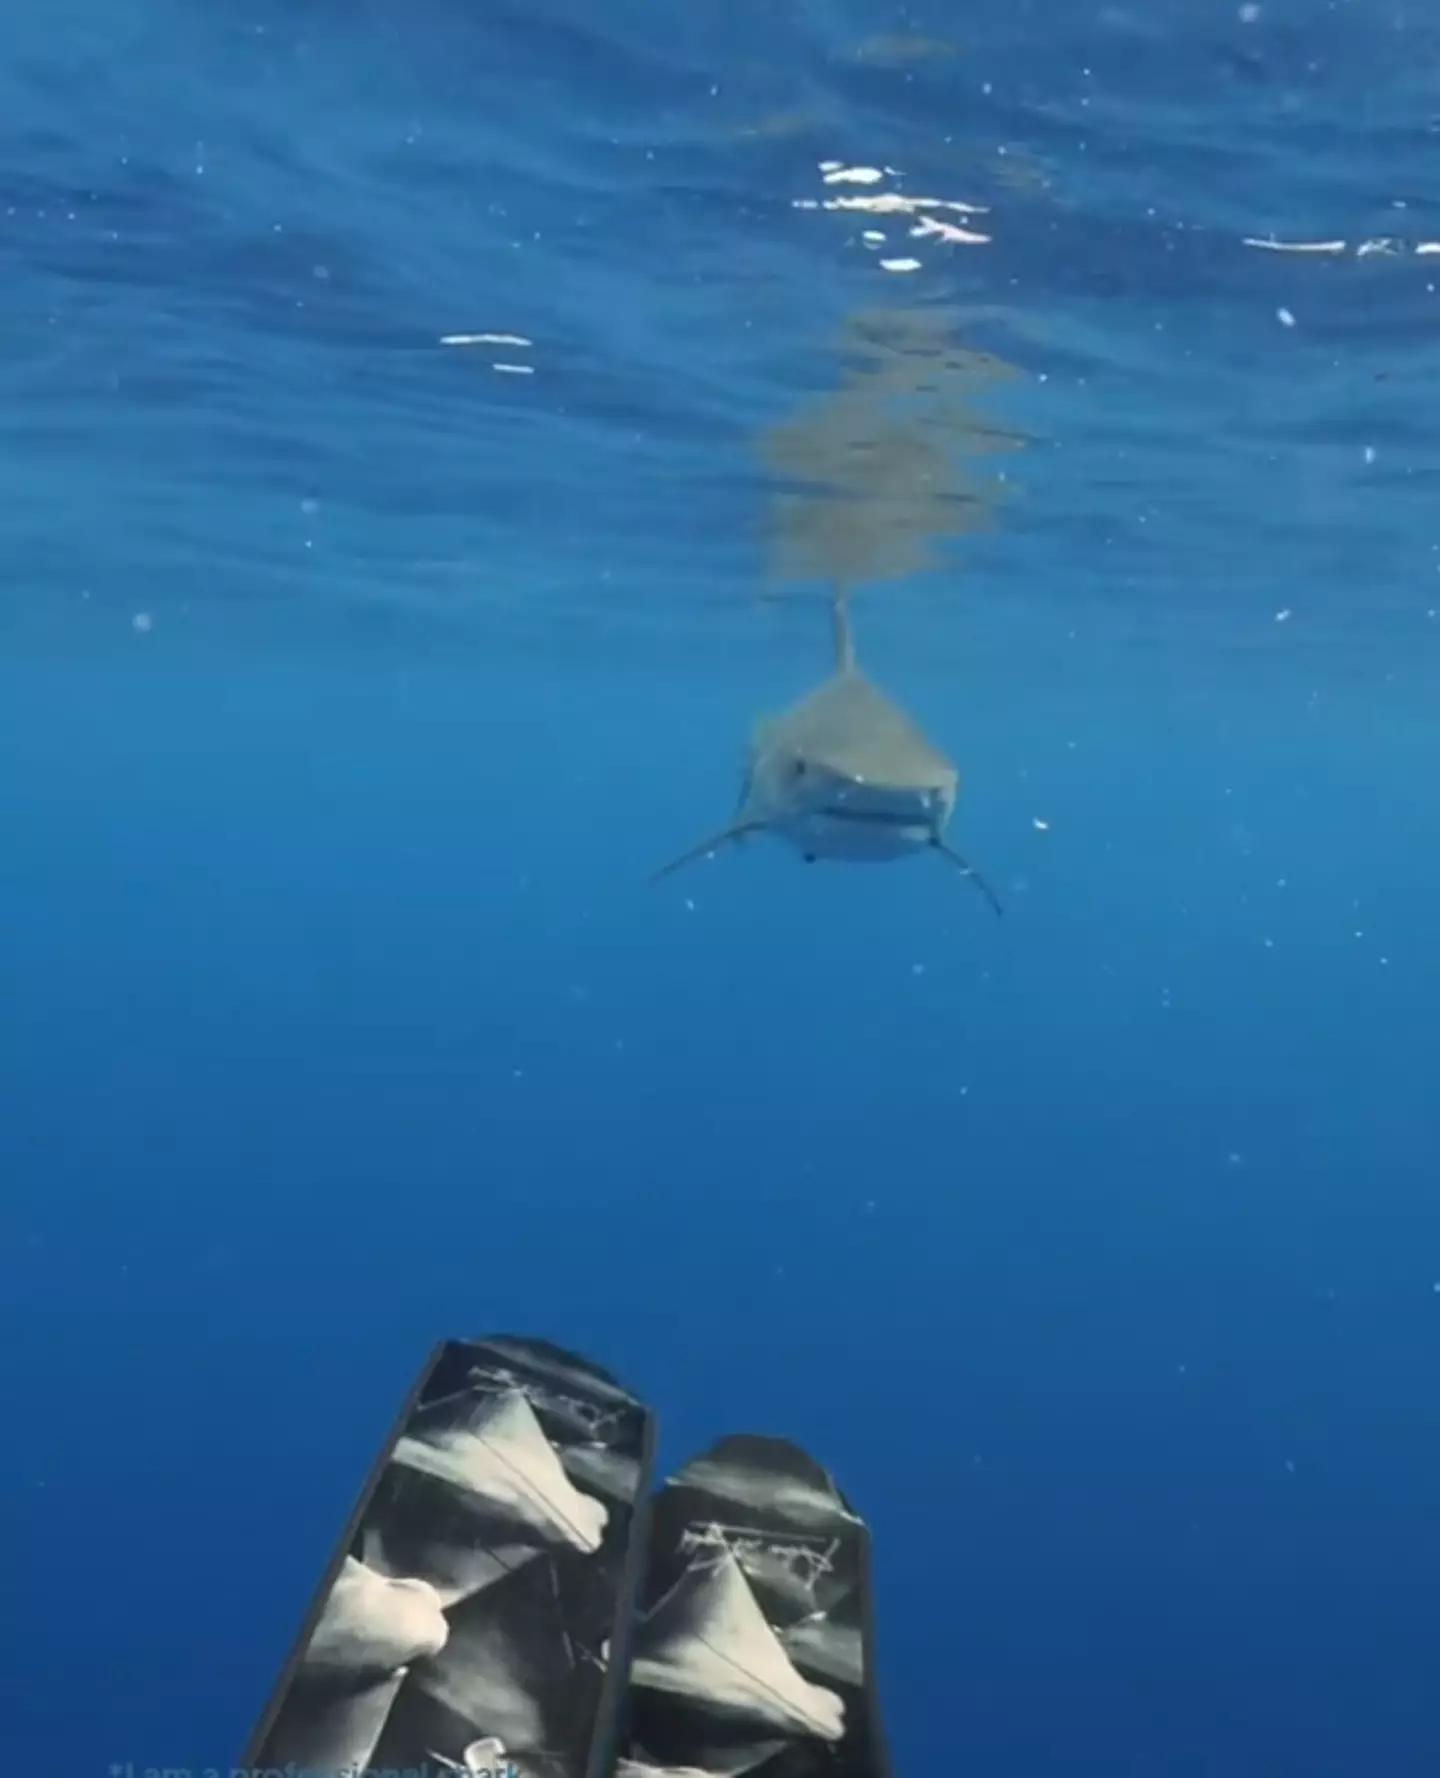 The shark was following behind her.